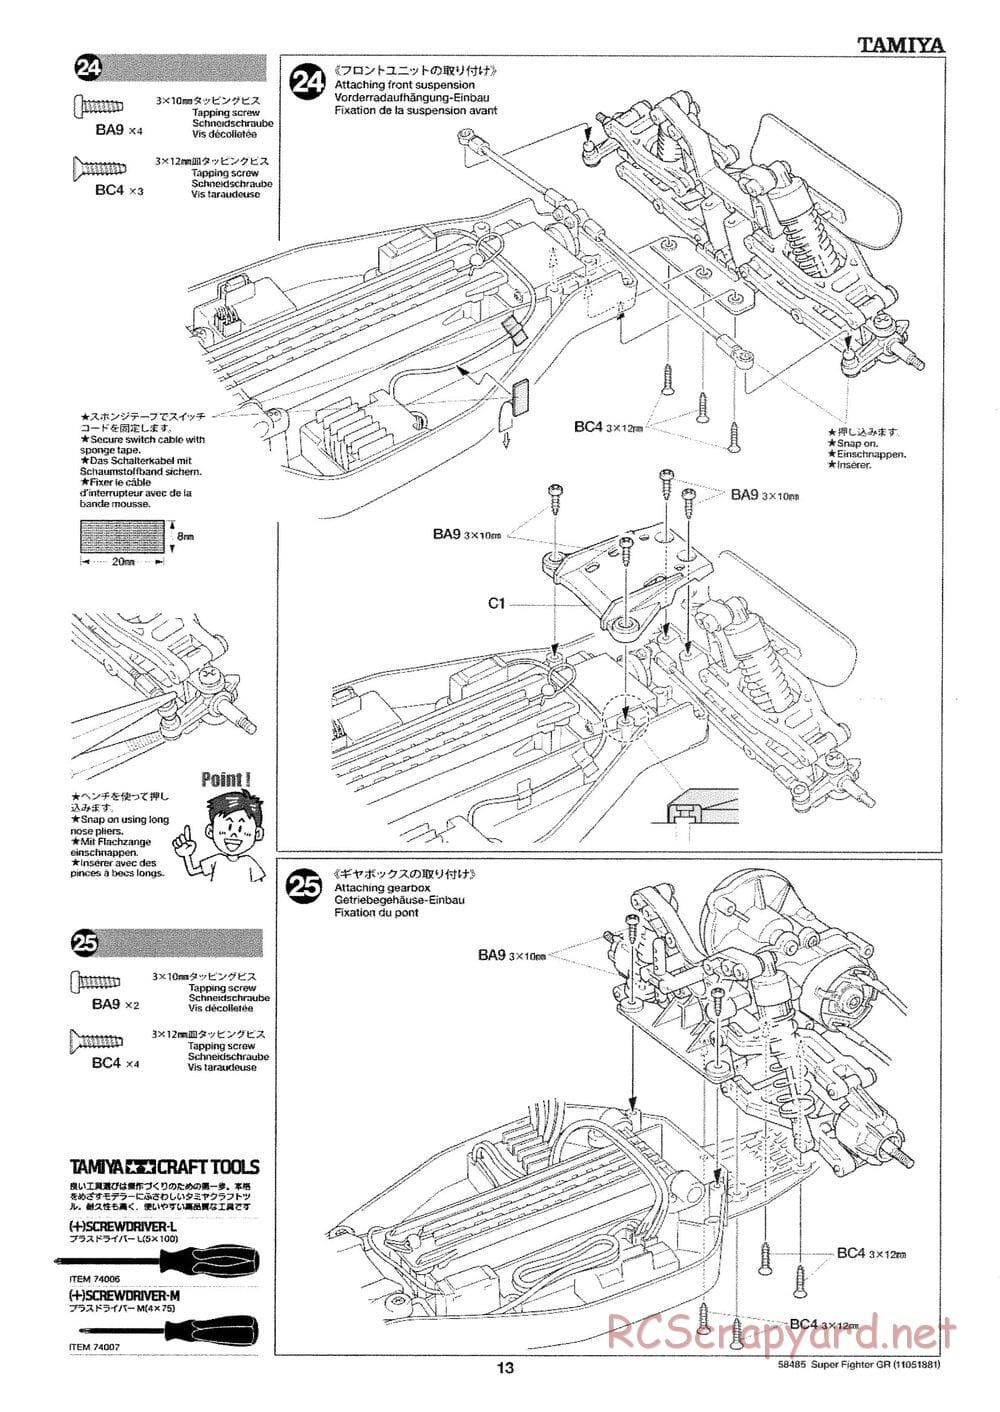 Tamiya - Super Fighter GR - DT-02 Chassis - Manual - Page 13